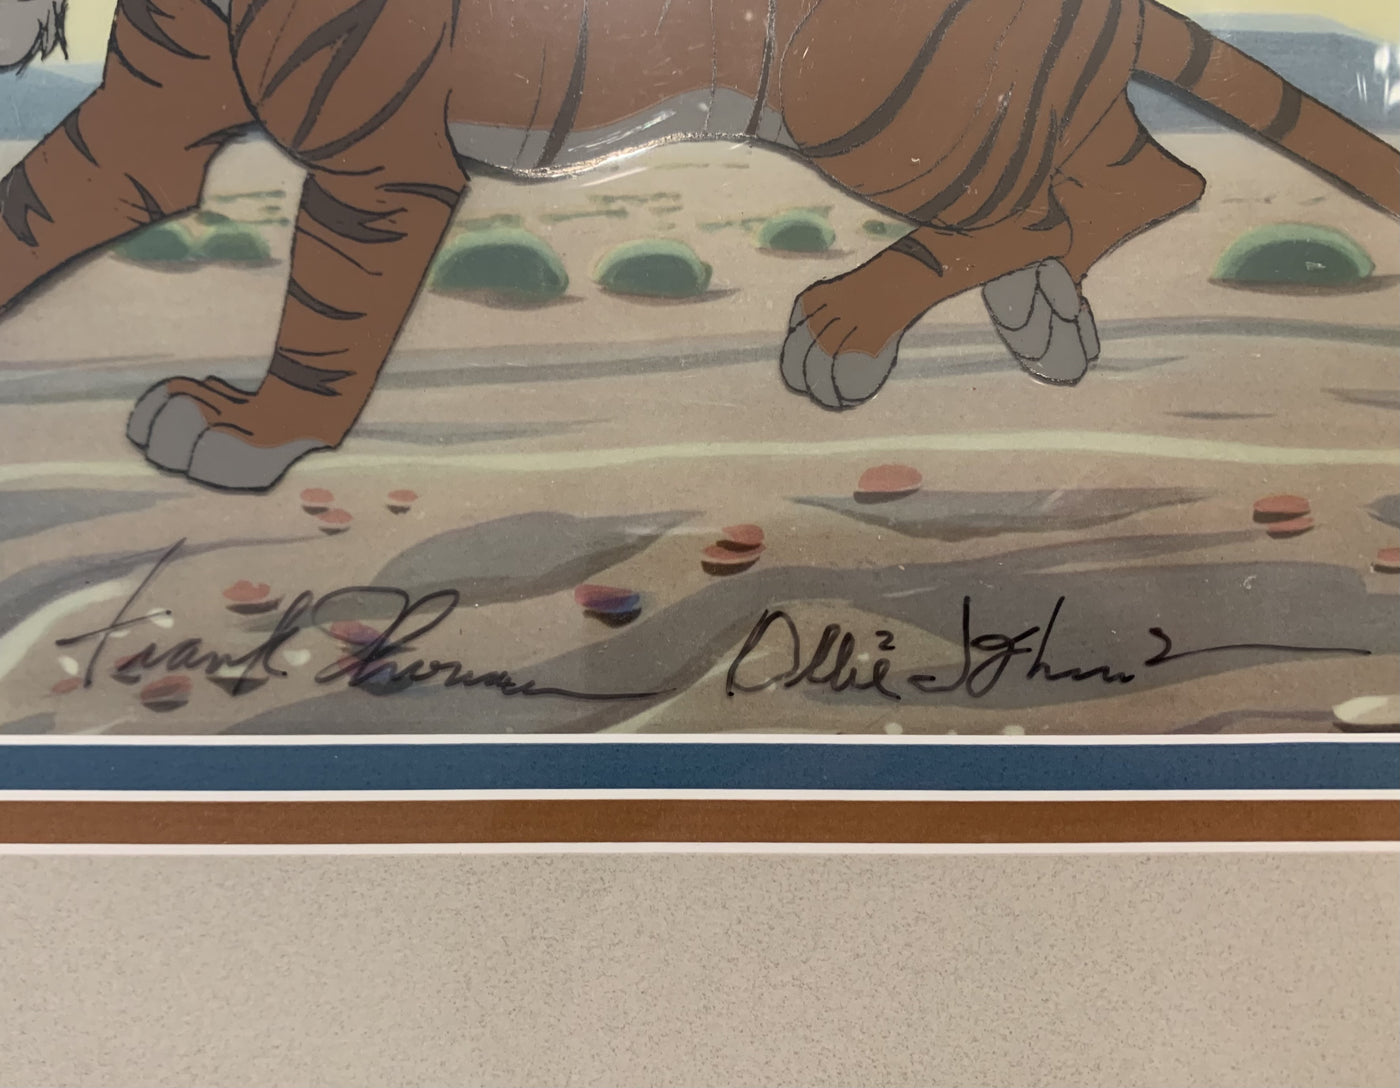 Original Walt Disney Production Cel from The Jungle Book featuring Shere Khan, Signed by Frank Thomas and Ollie Johnston